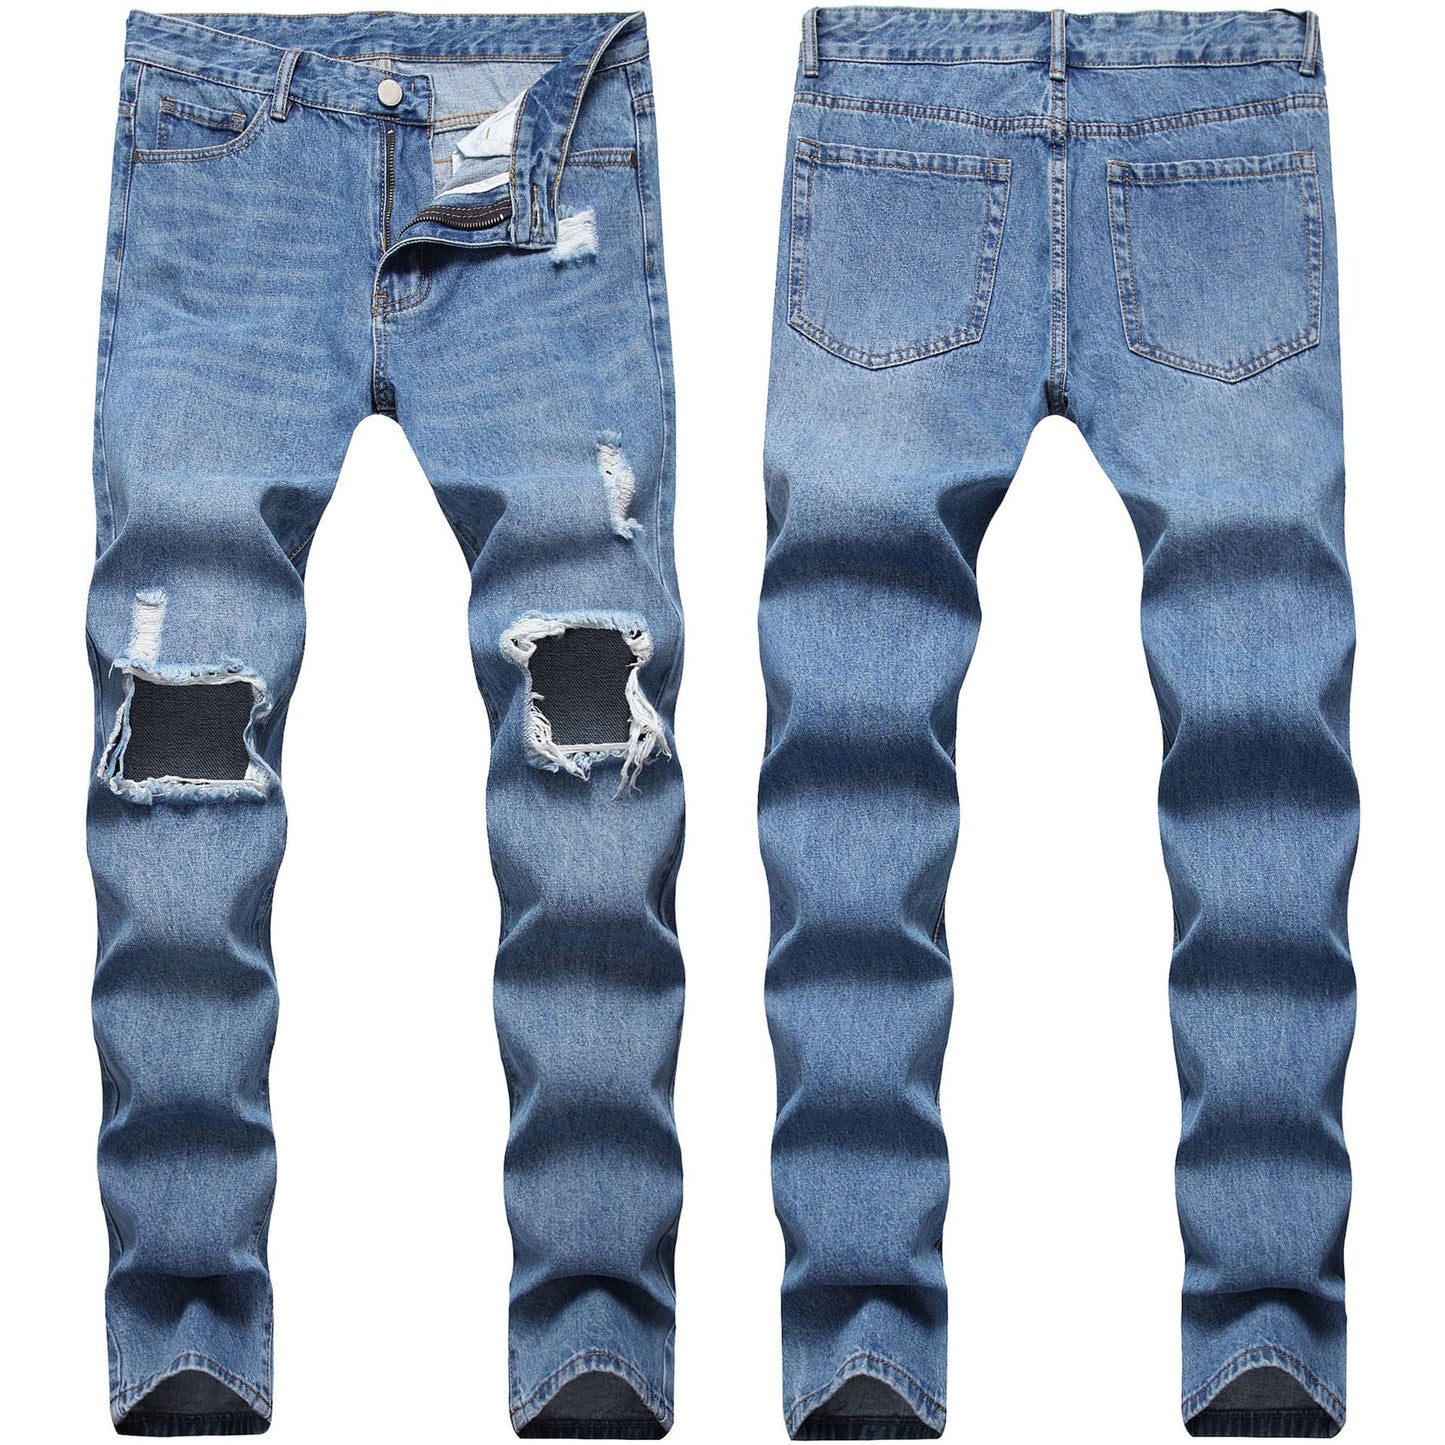 Assortment of Ripped Torn Straight Slim Jeans